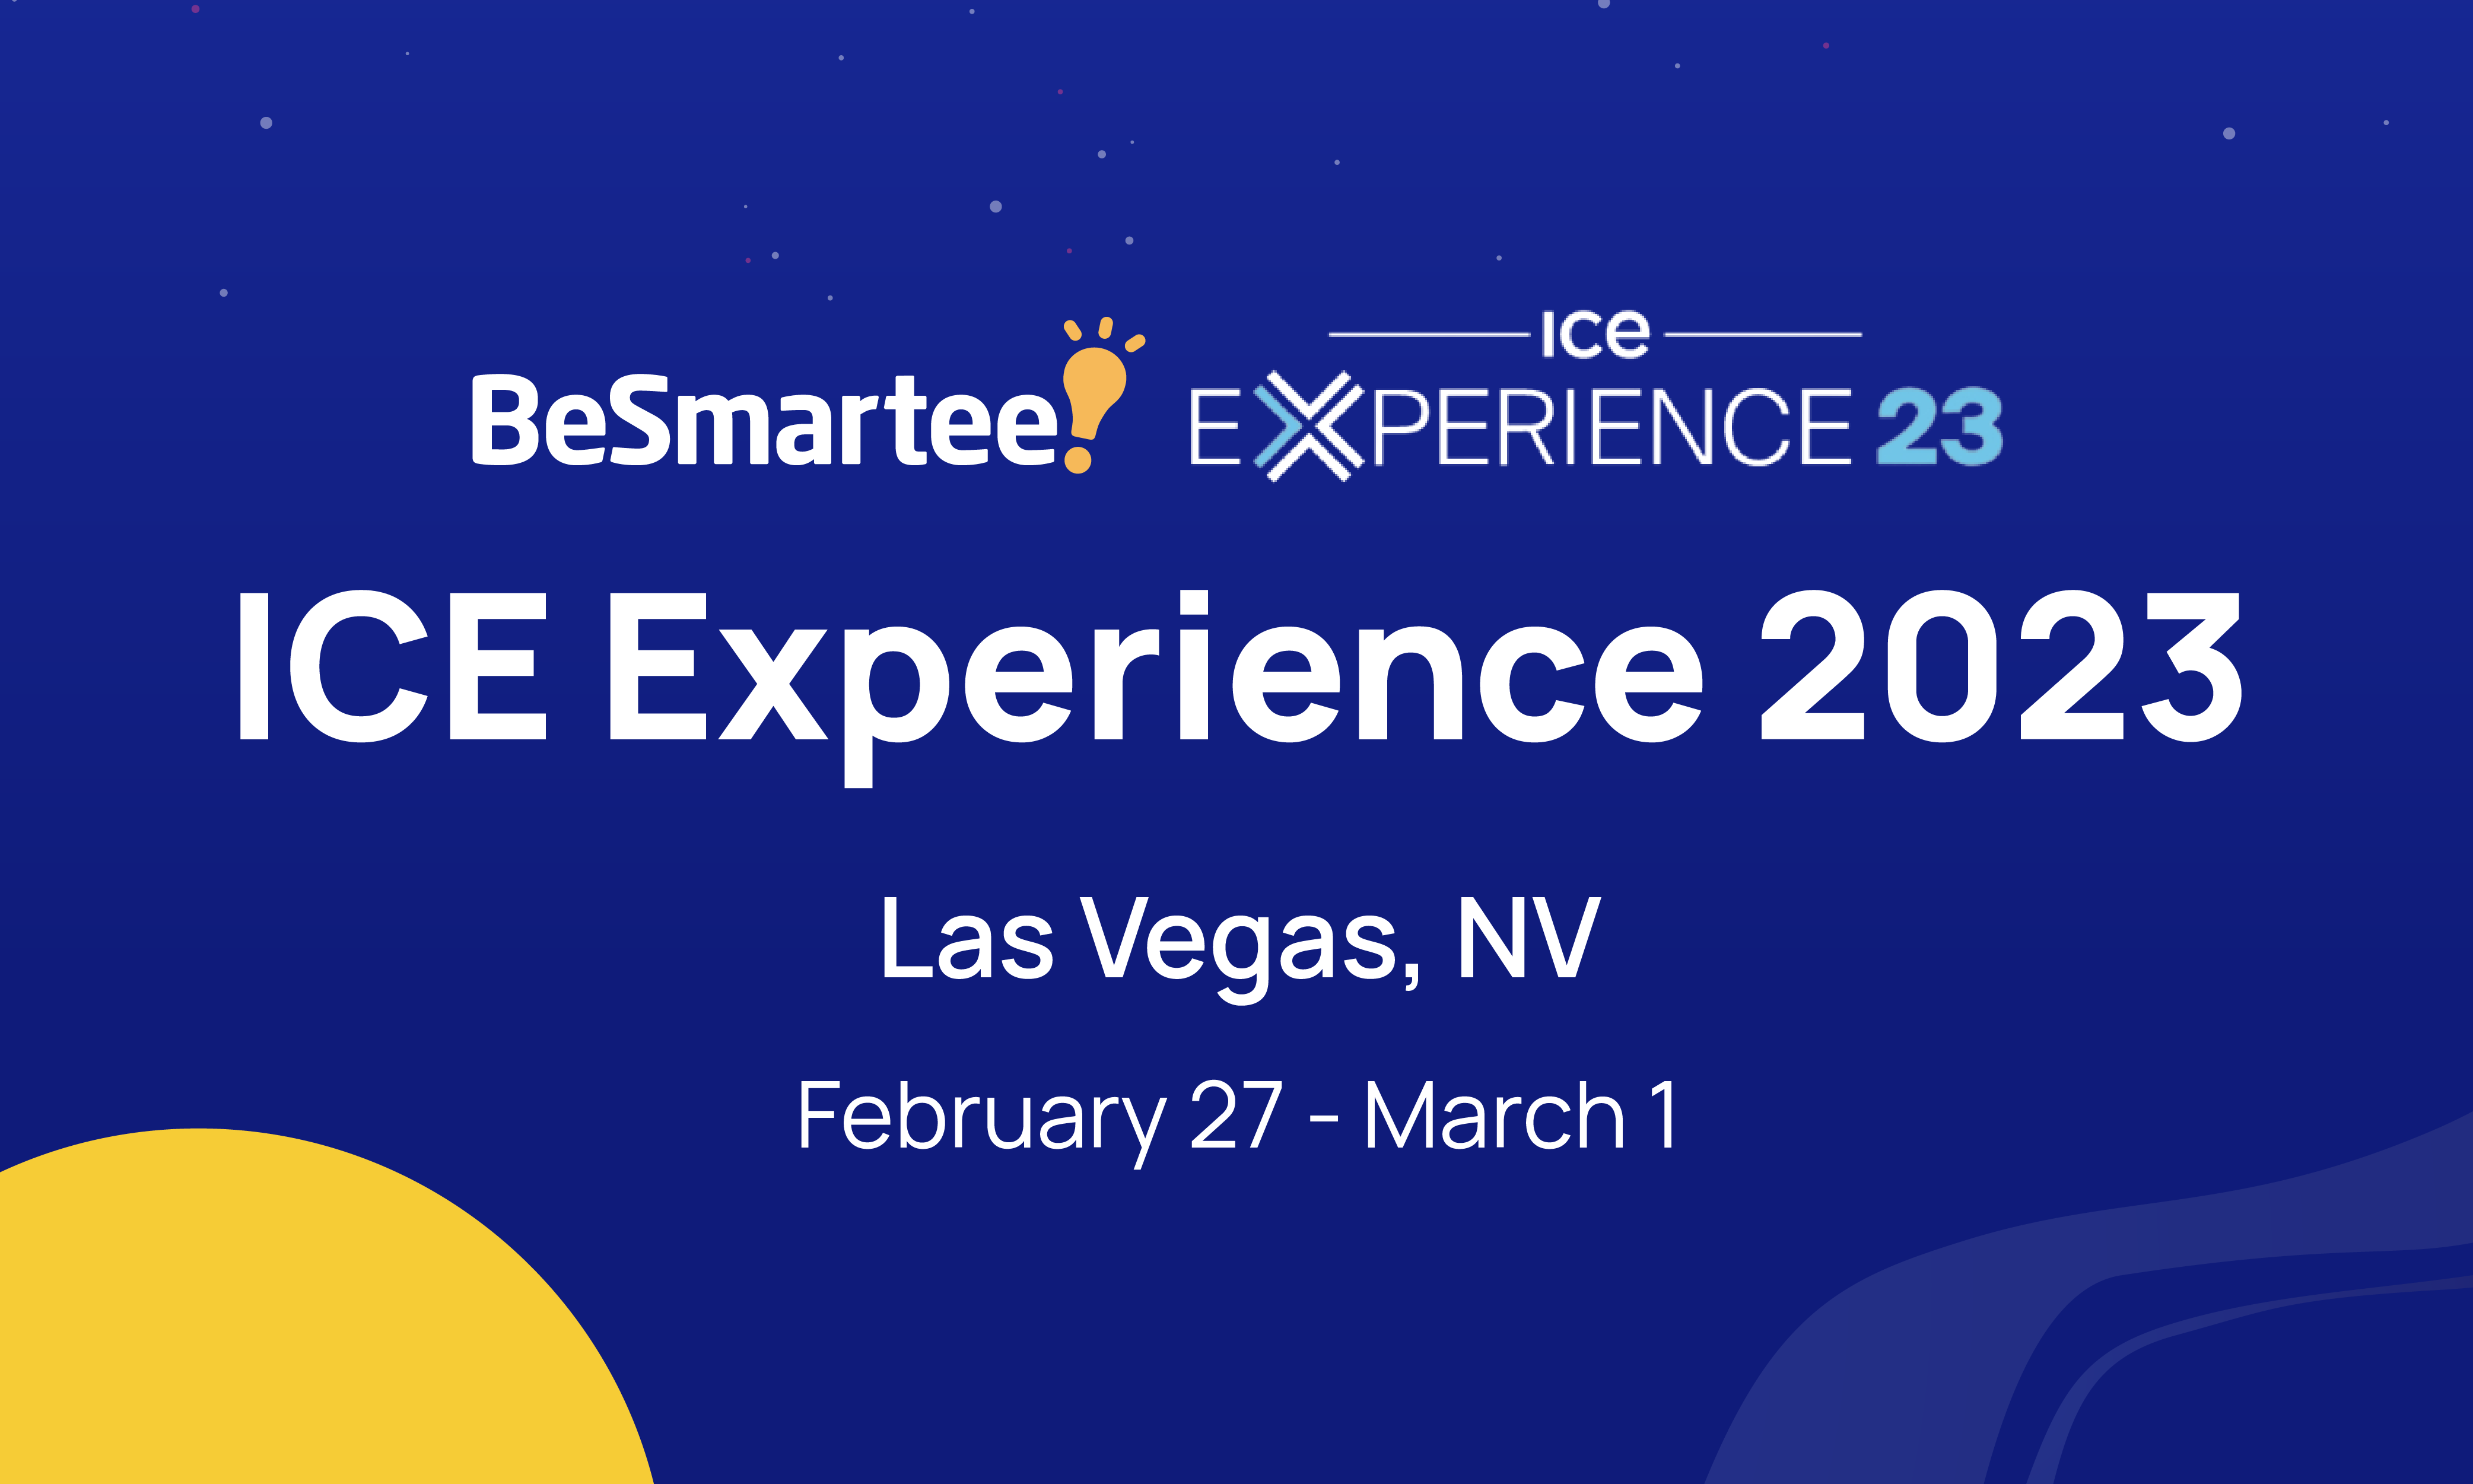 BeSmartee Announces Exhibitor Presence at ICE Experience 2023